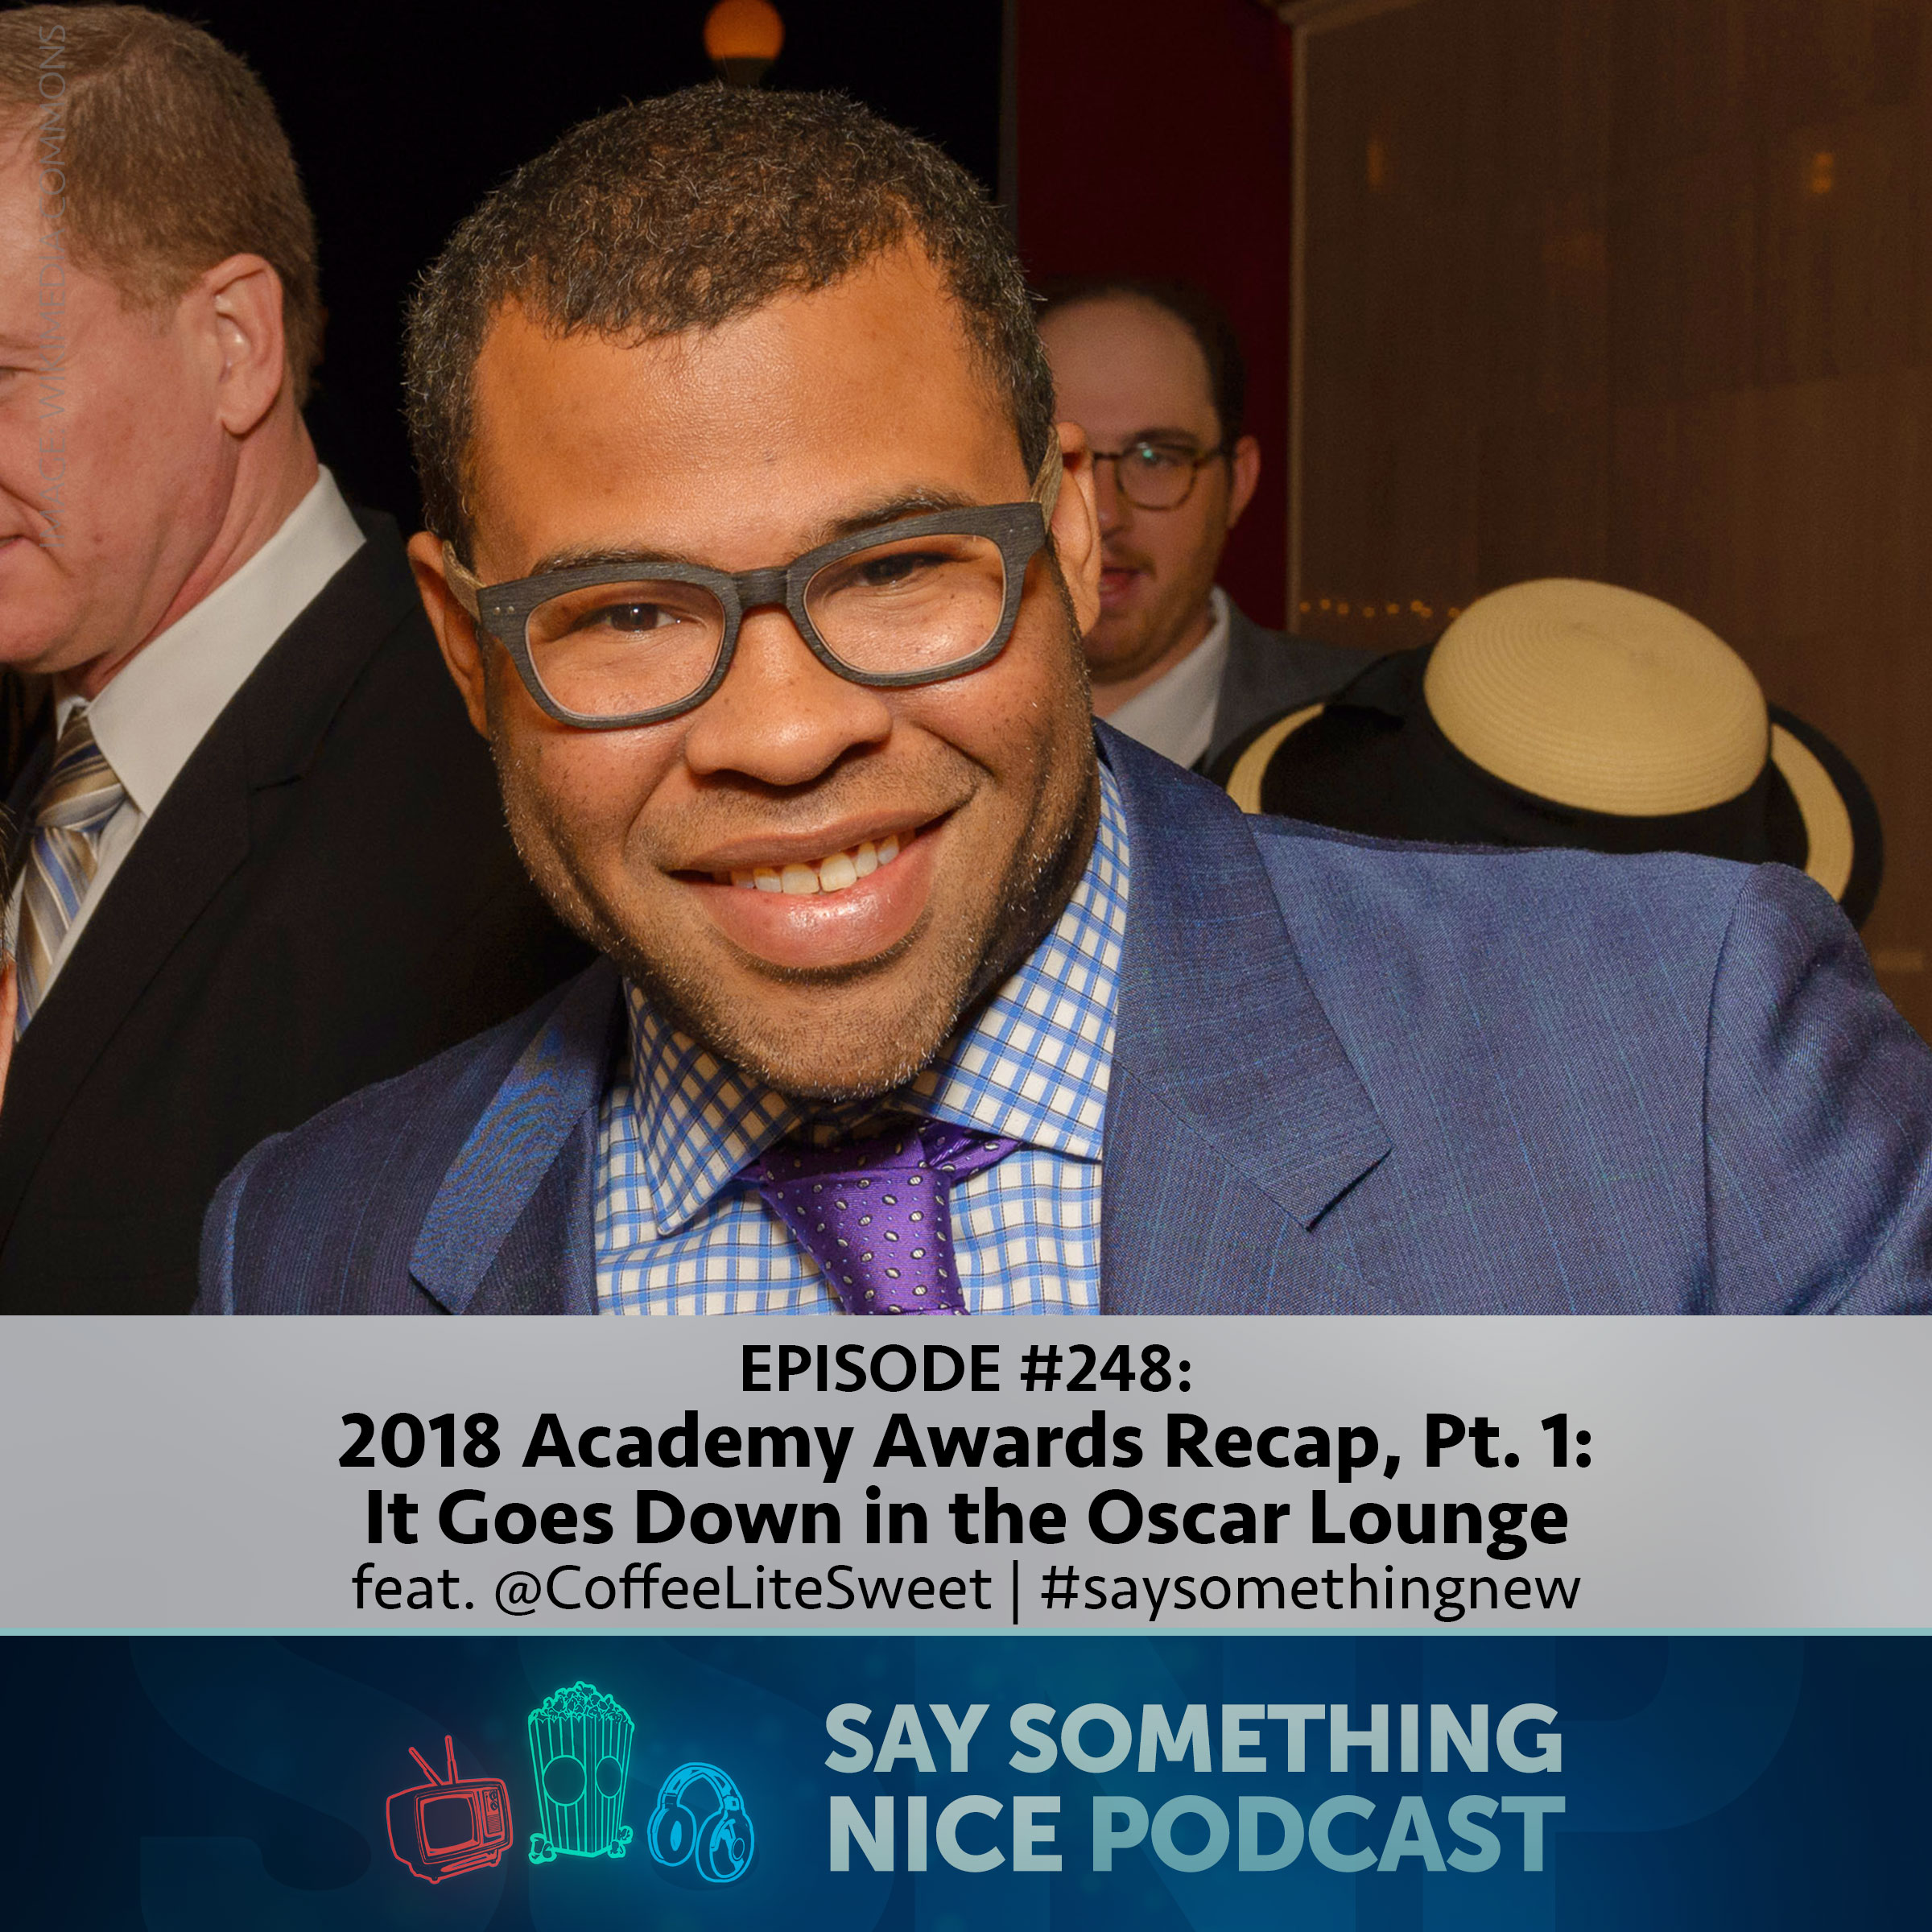 SSNPod #248 | 2018 Academy Awards Recap, Pt. 1: It Goes Down in the Oscar Lounge (feat. @CoffeeLiteSweet) | #saysomethingnew